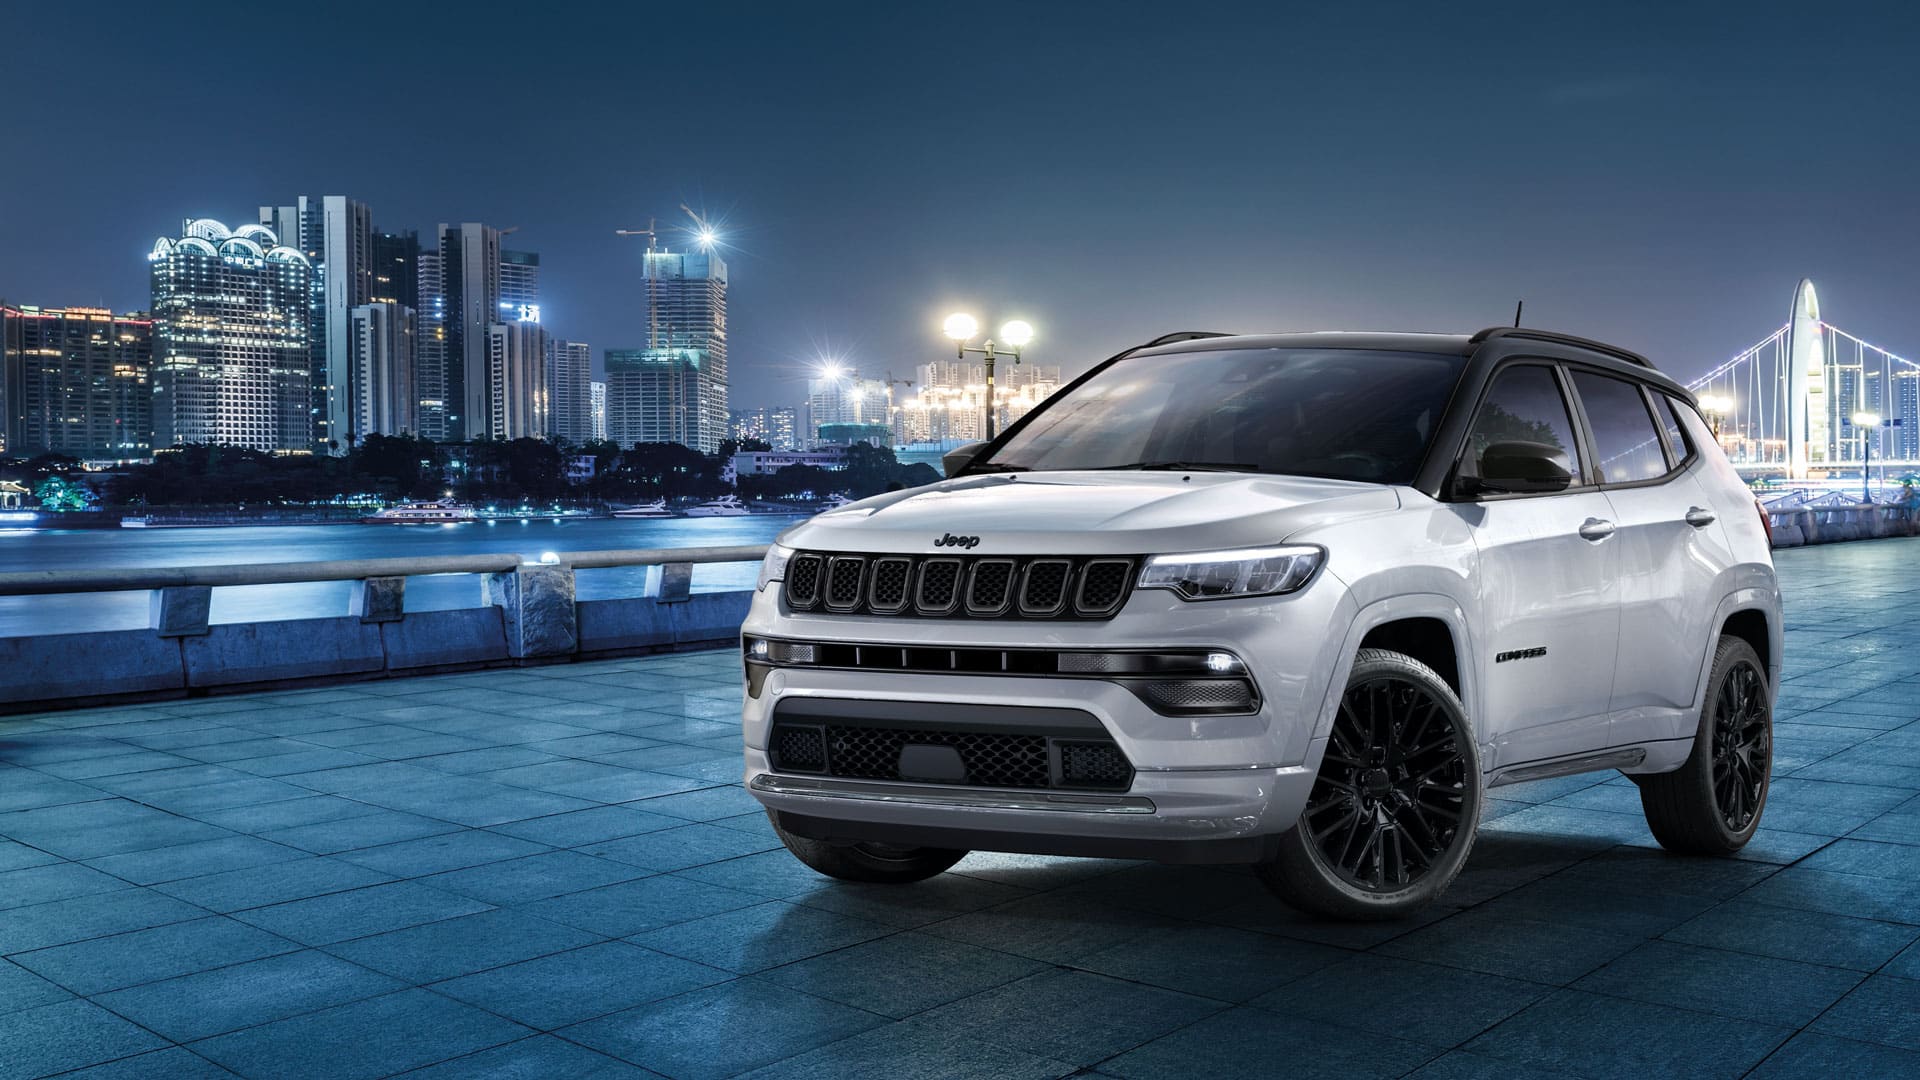 Enjoy the City night lights in the Jeep Compass 4XE